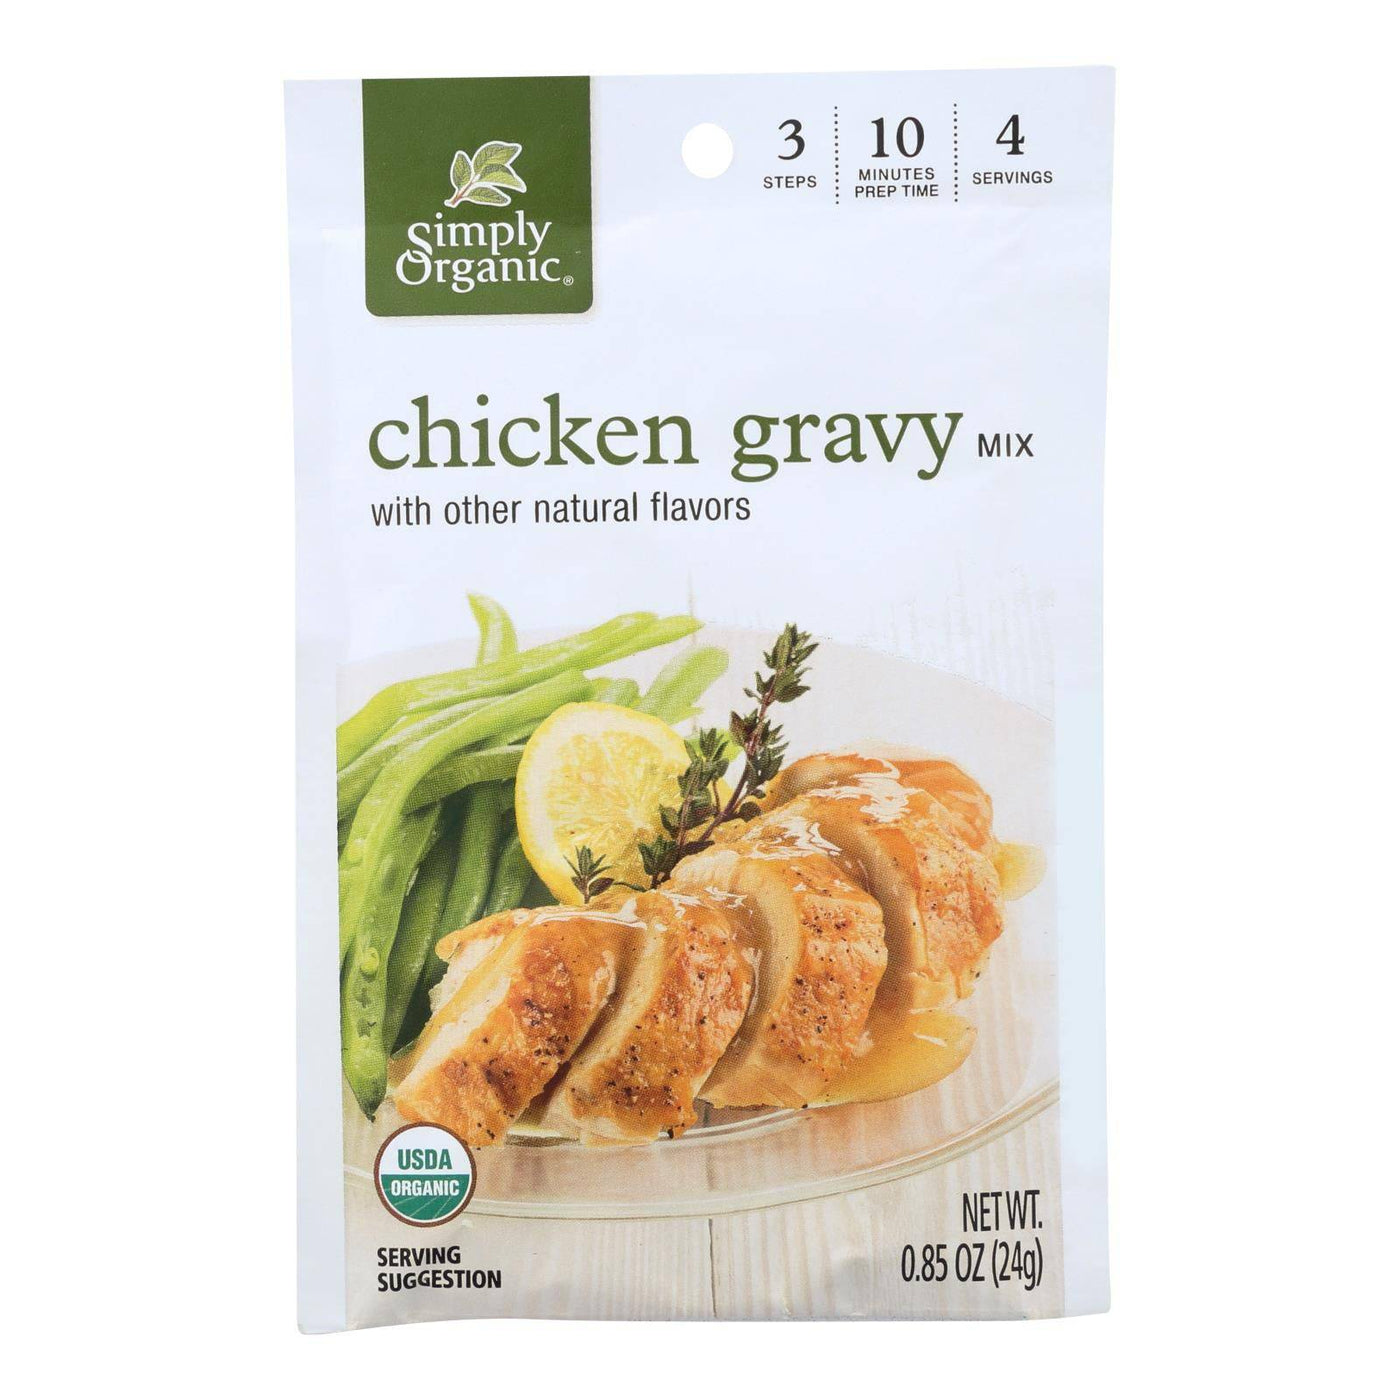 Buy Simply Organic Seasoning Mix - Roasted Chicken Gravy - Case Of 12 - 0.85 Oz.  at OnlyNaturals.us